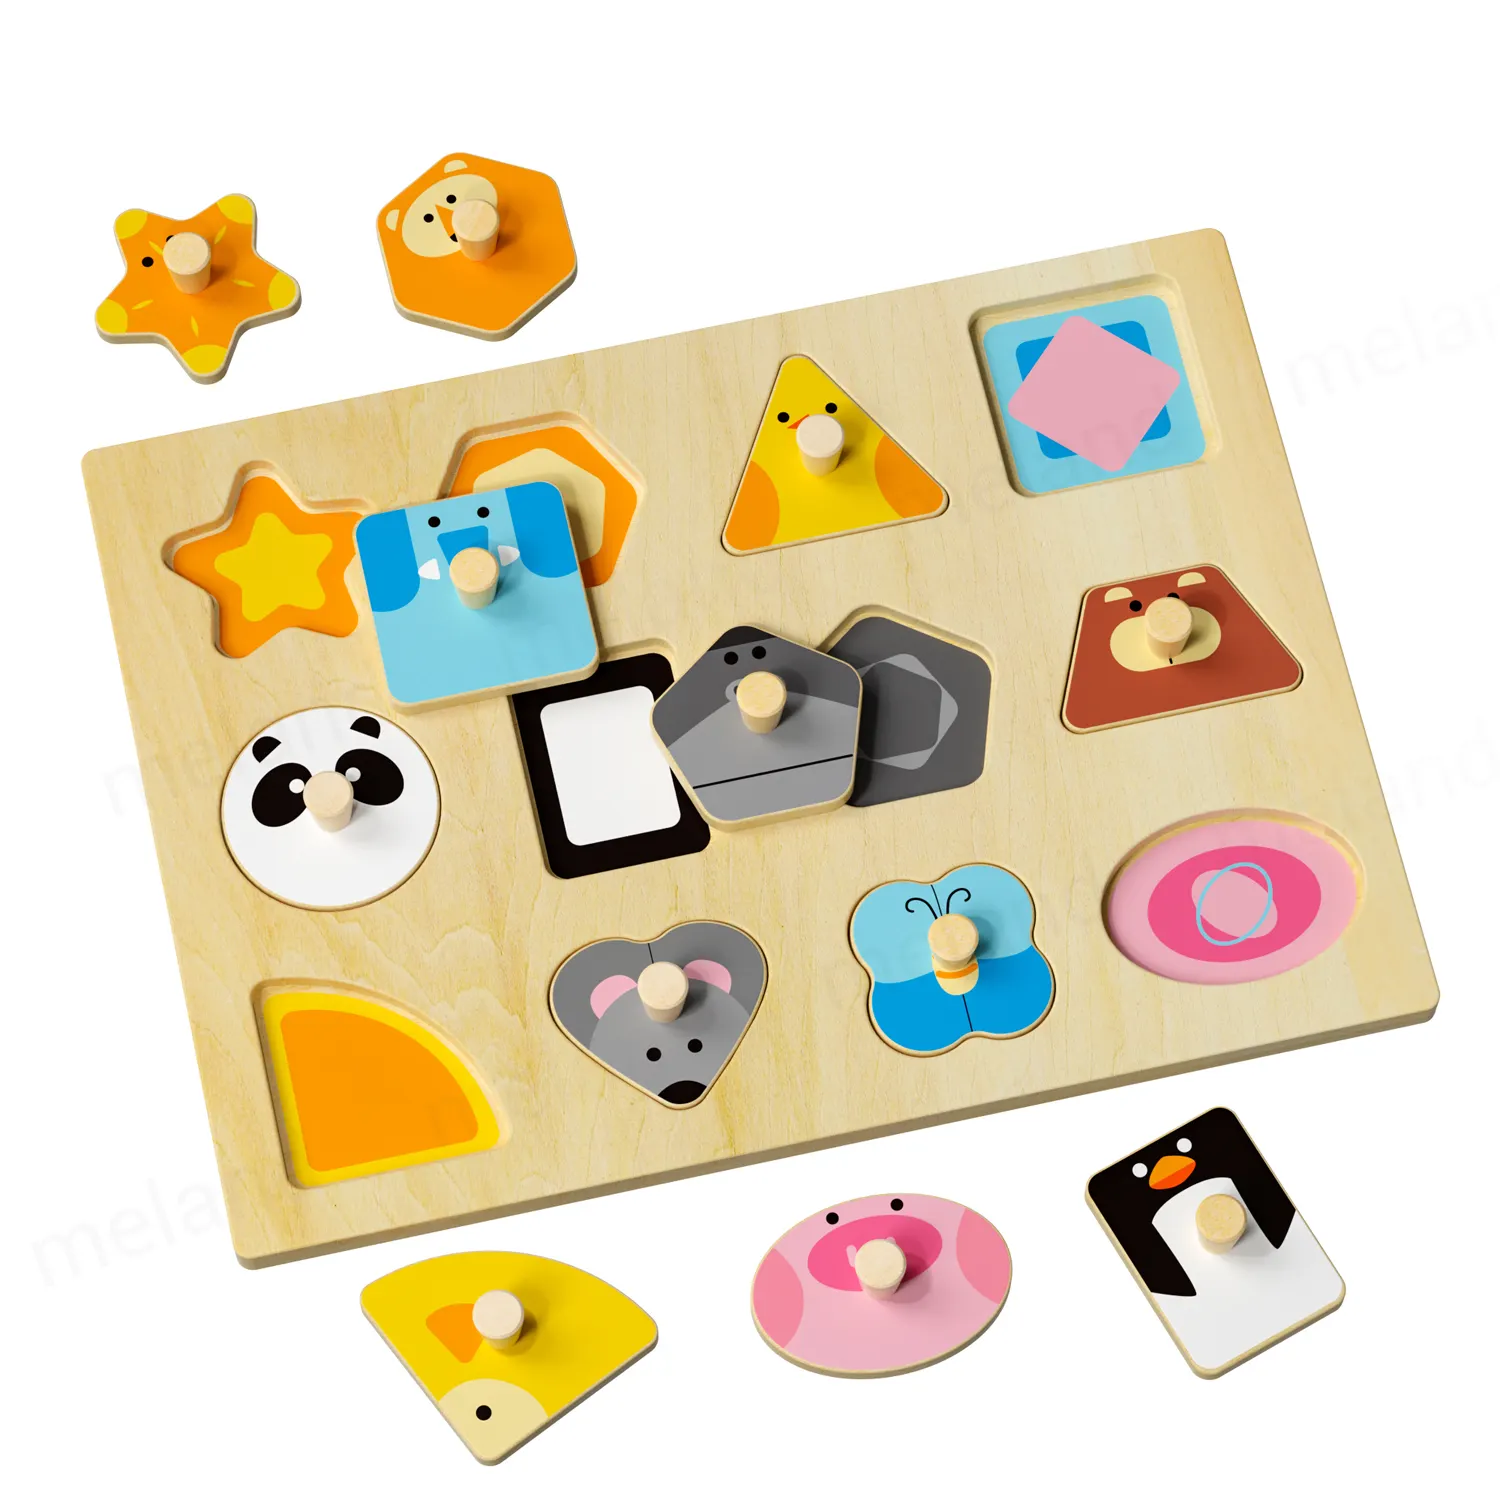 Children wooden shape matching geometric sorting board toddlers animal cognitive jigsaw puzzles educational toys for kids